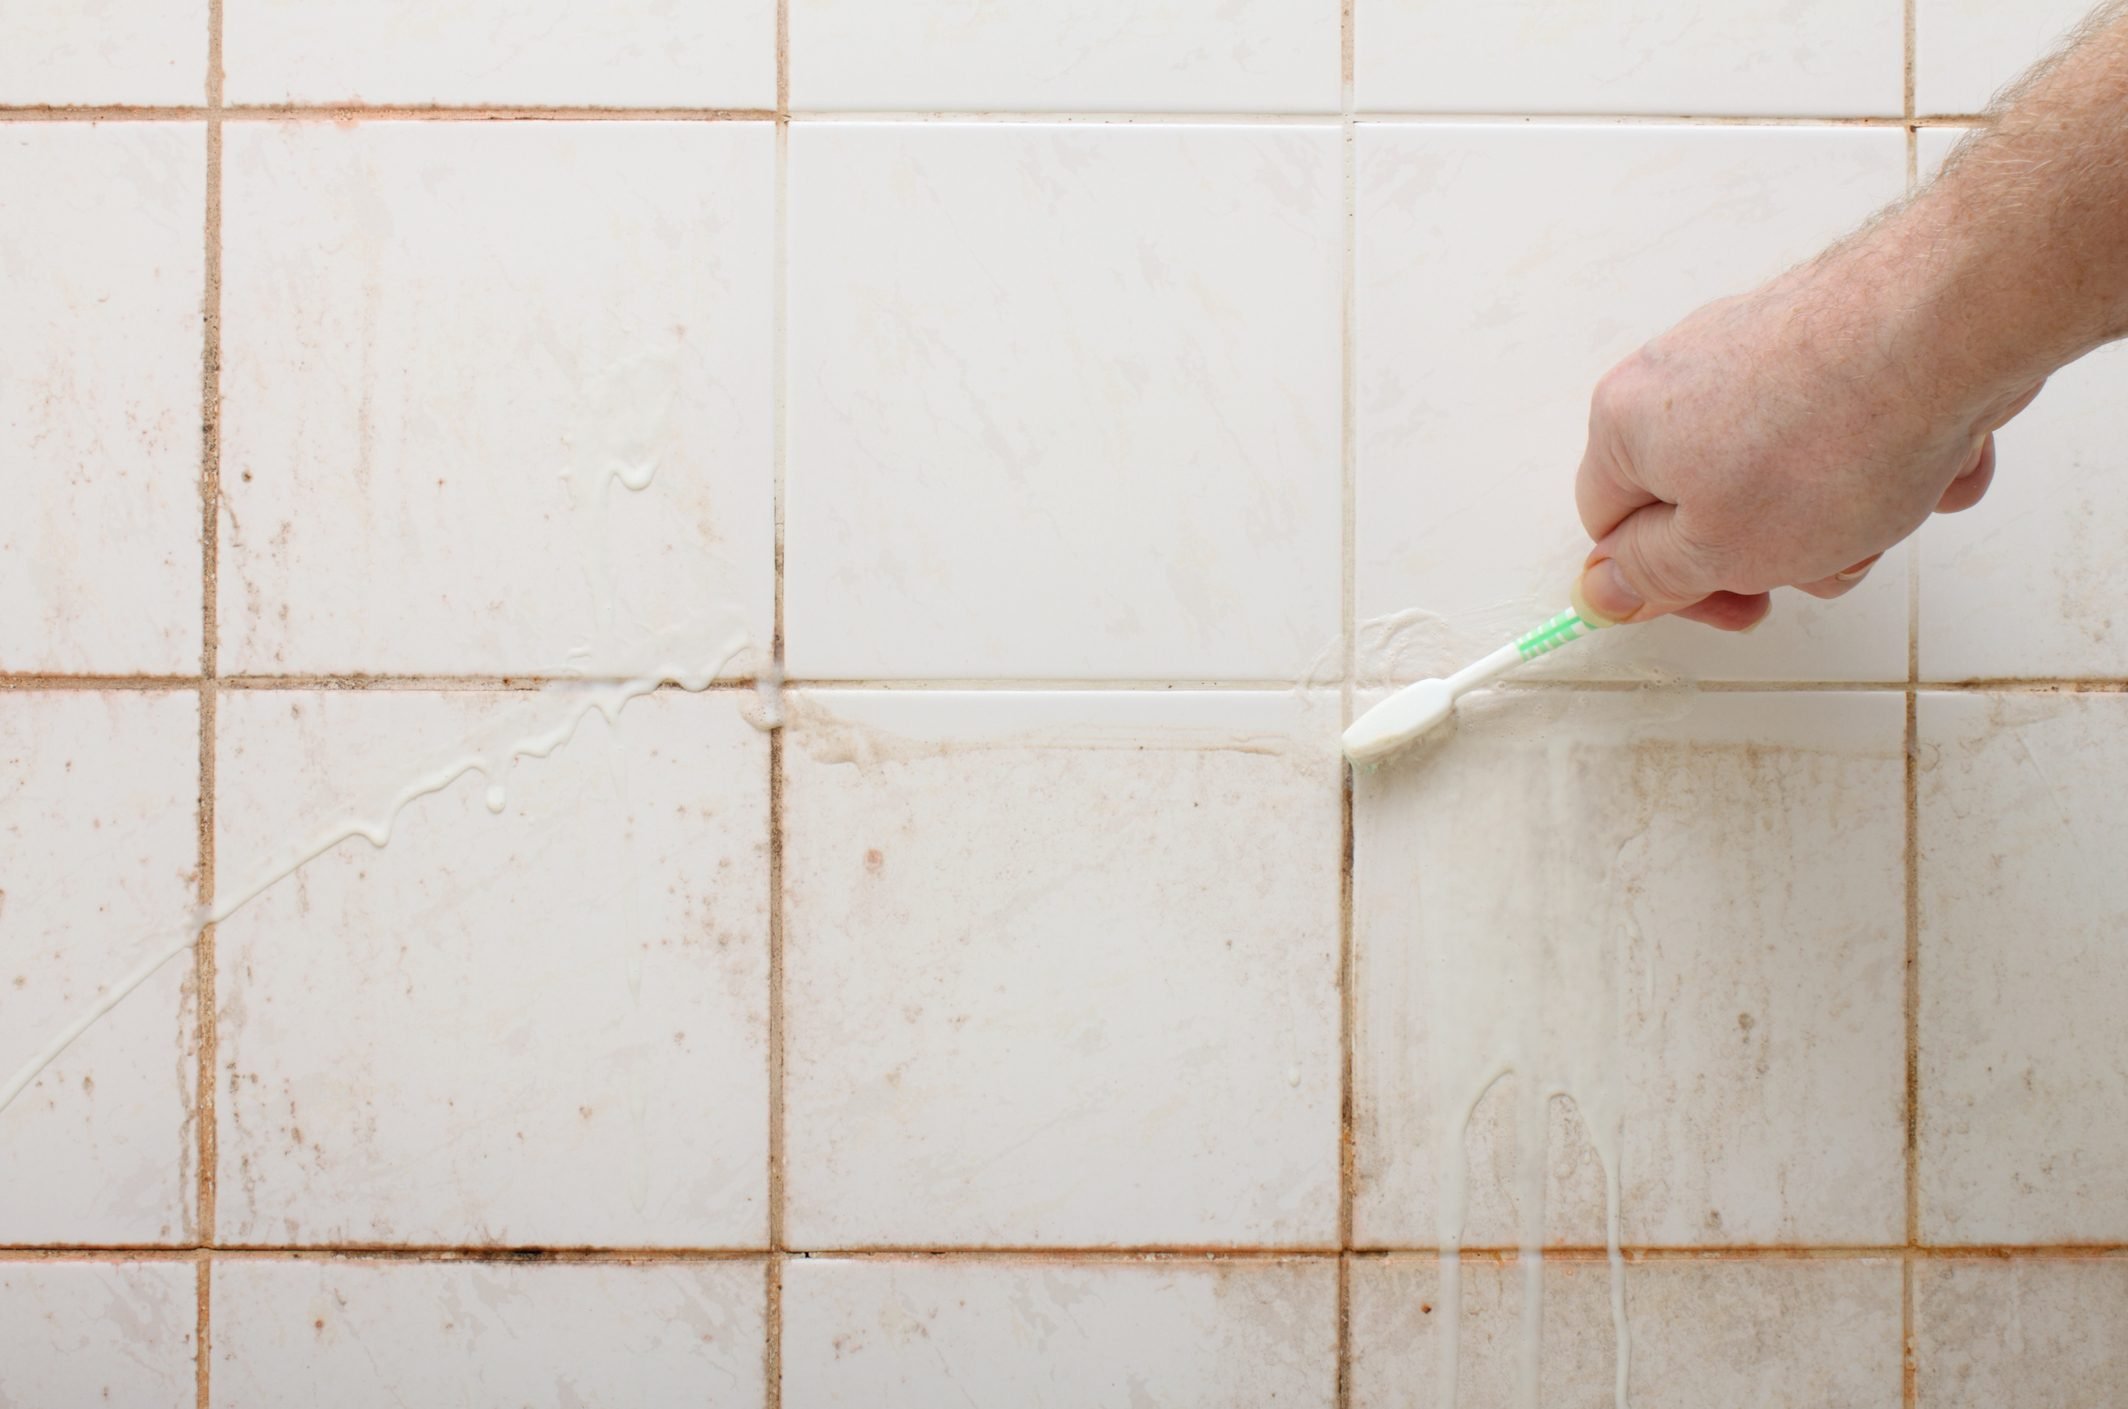 How to clean bathroom tile grout: Home remedies to banish mould